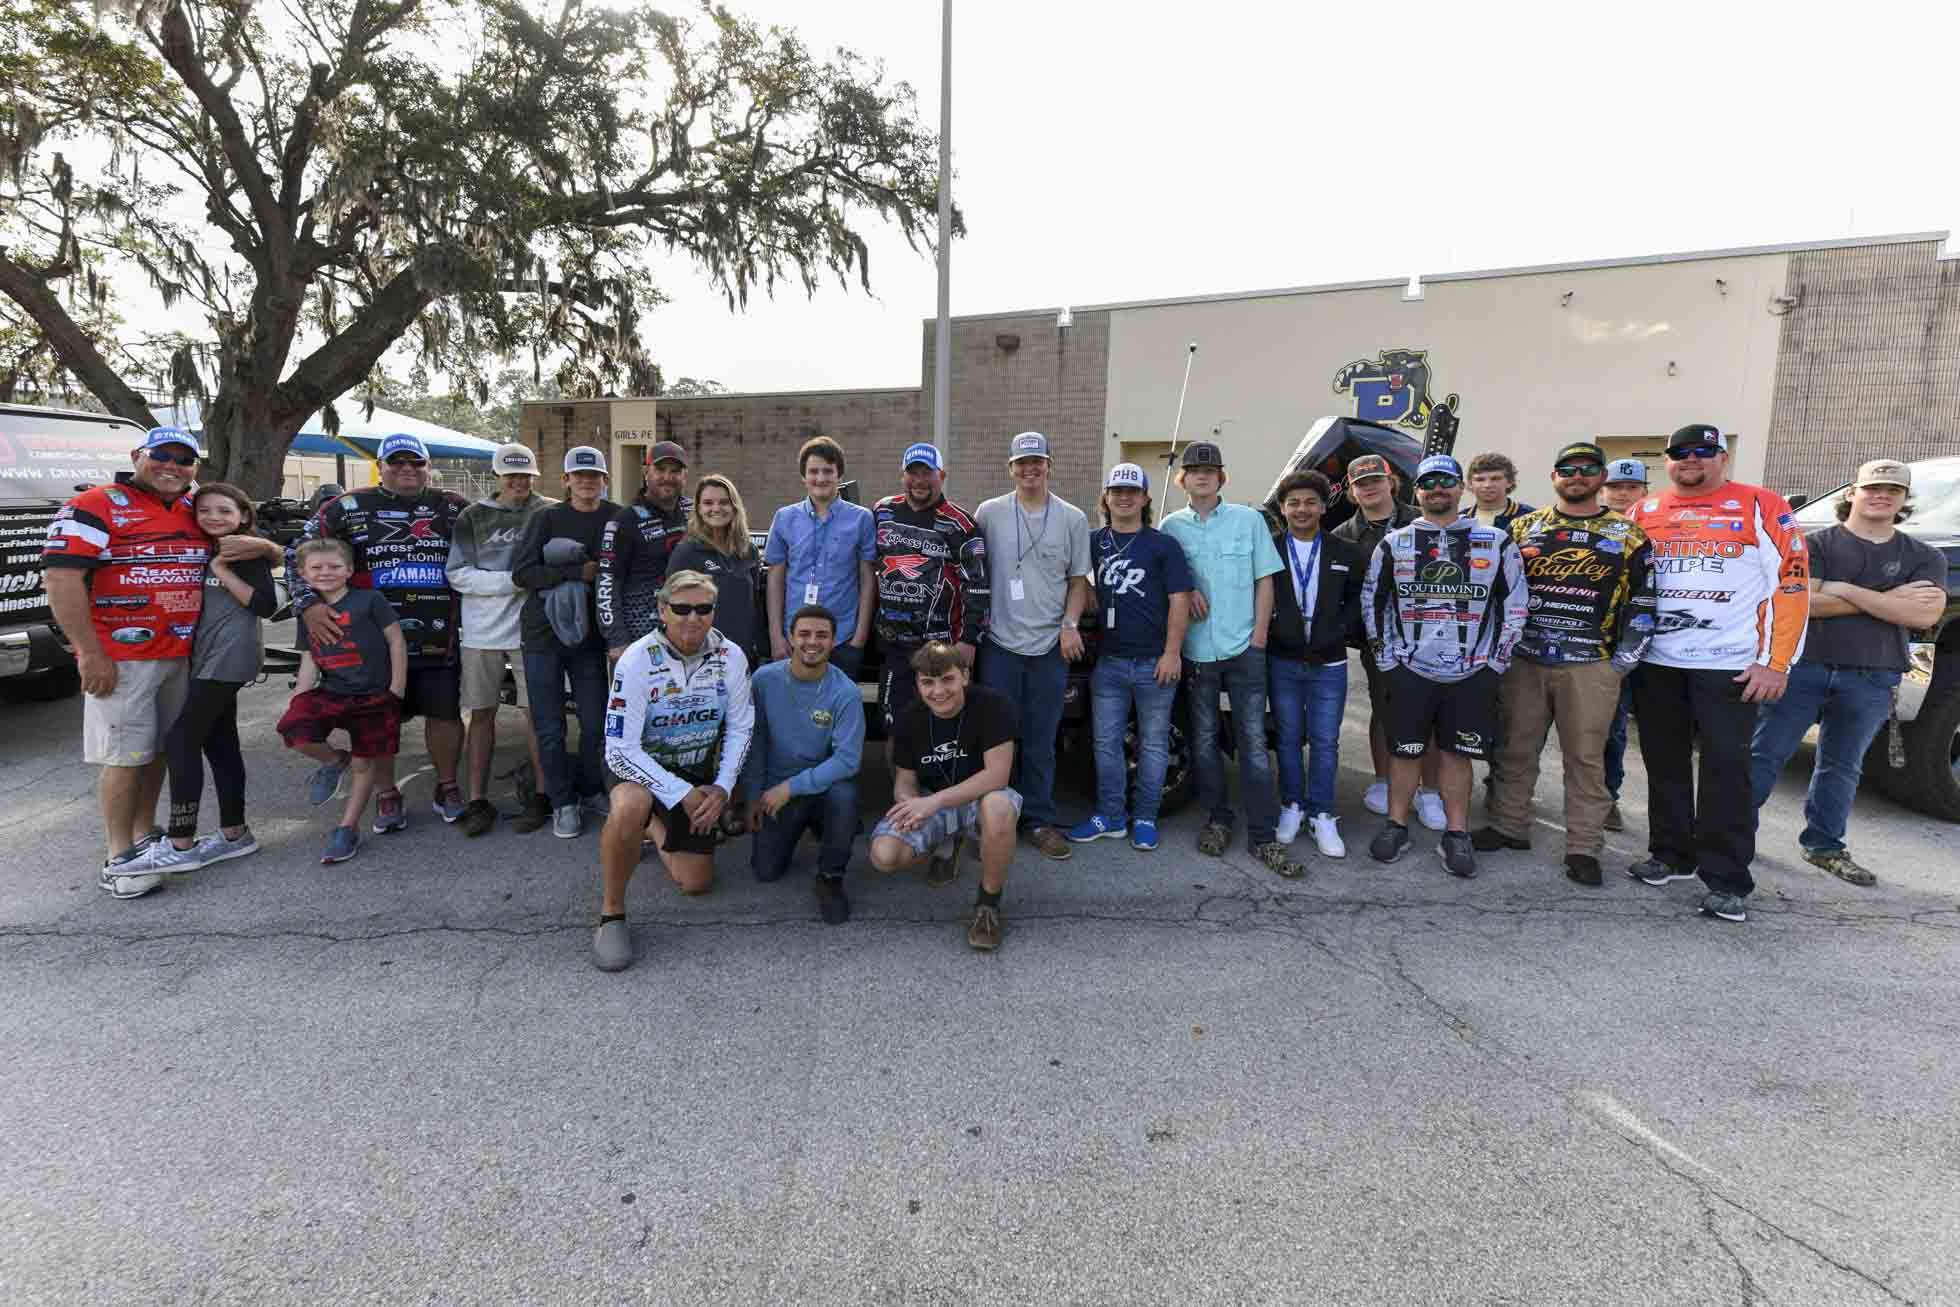 The Palatka High School fishing team gathered for a photo will the 10 pros who visited the school. Sharon Harris, Palatka High Schoolsâ medical teacher the opportunity for students to mingle with pros and learn more about the business.
<br><br>
âWe have students sitting in our classrooms that this is their dream â to do this one day,â Harris said. 